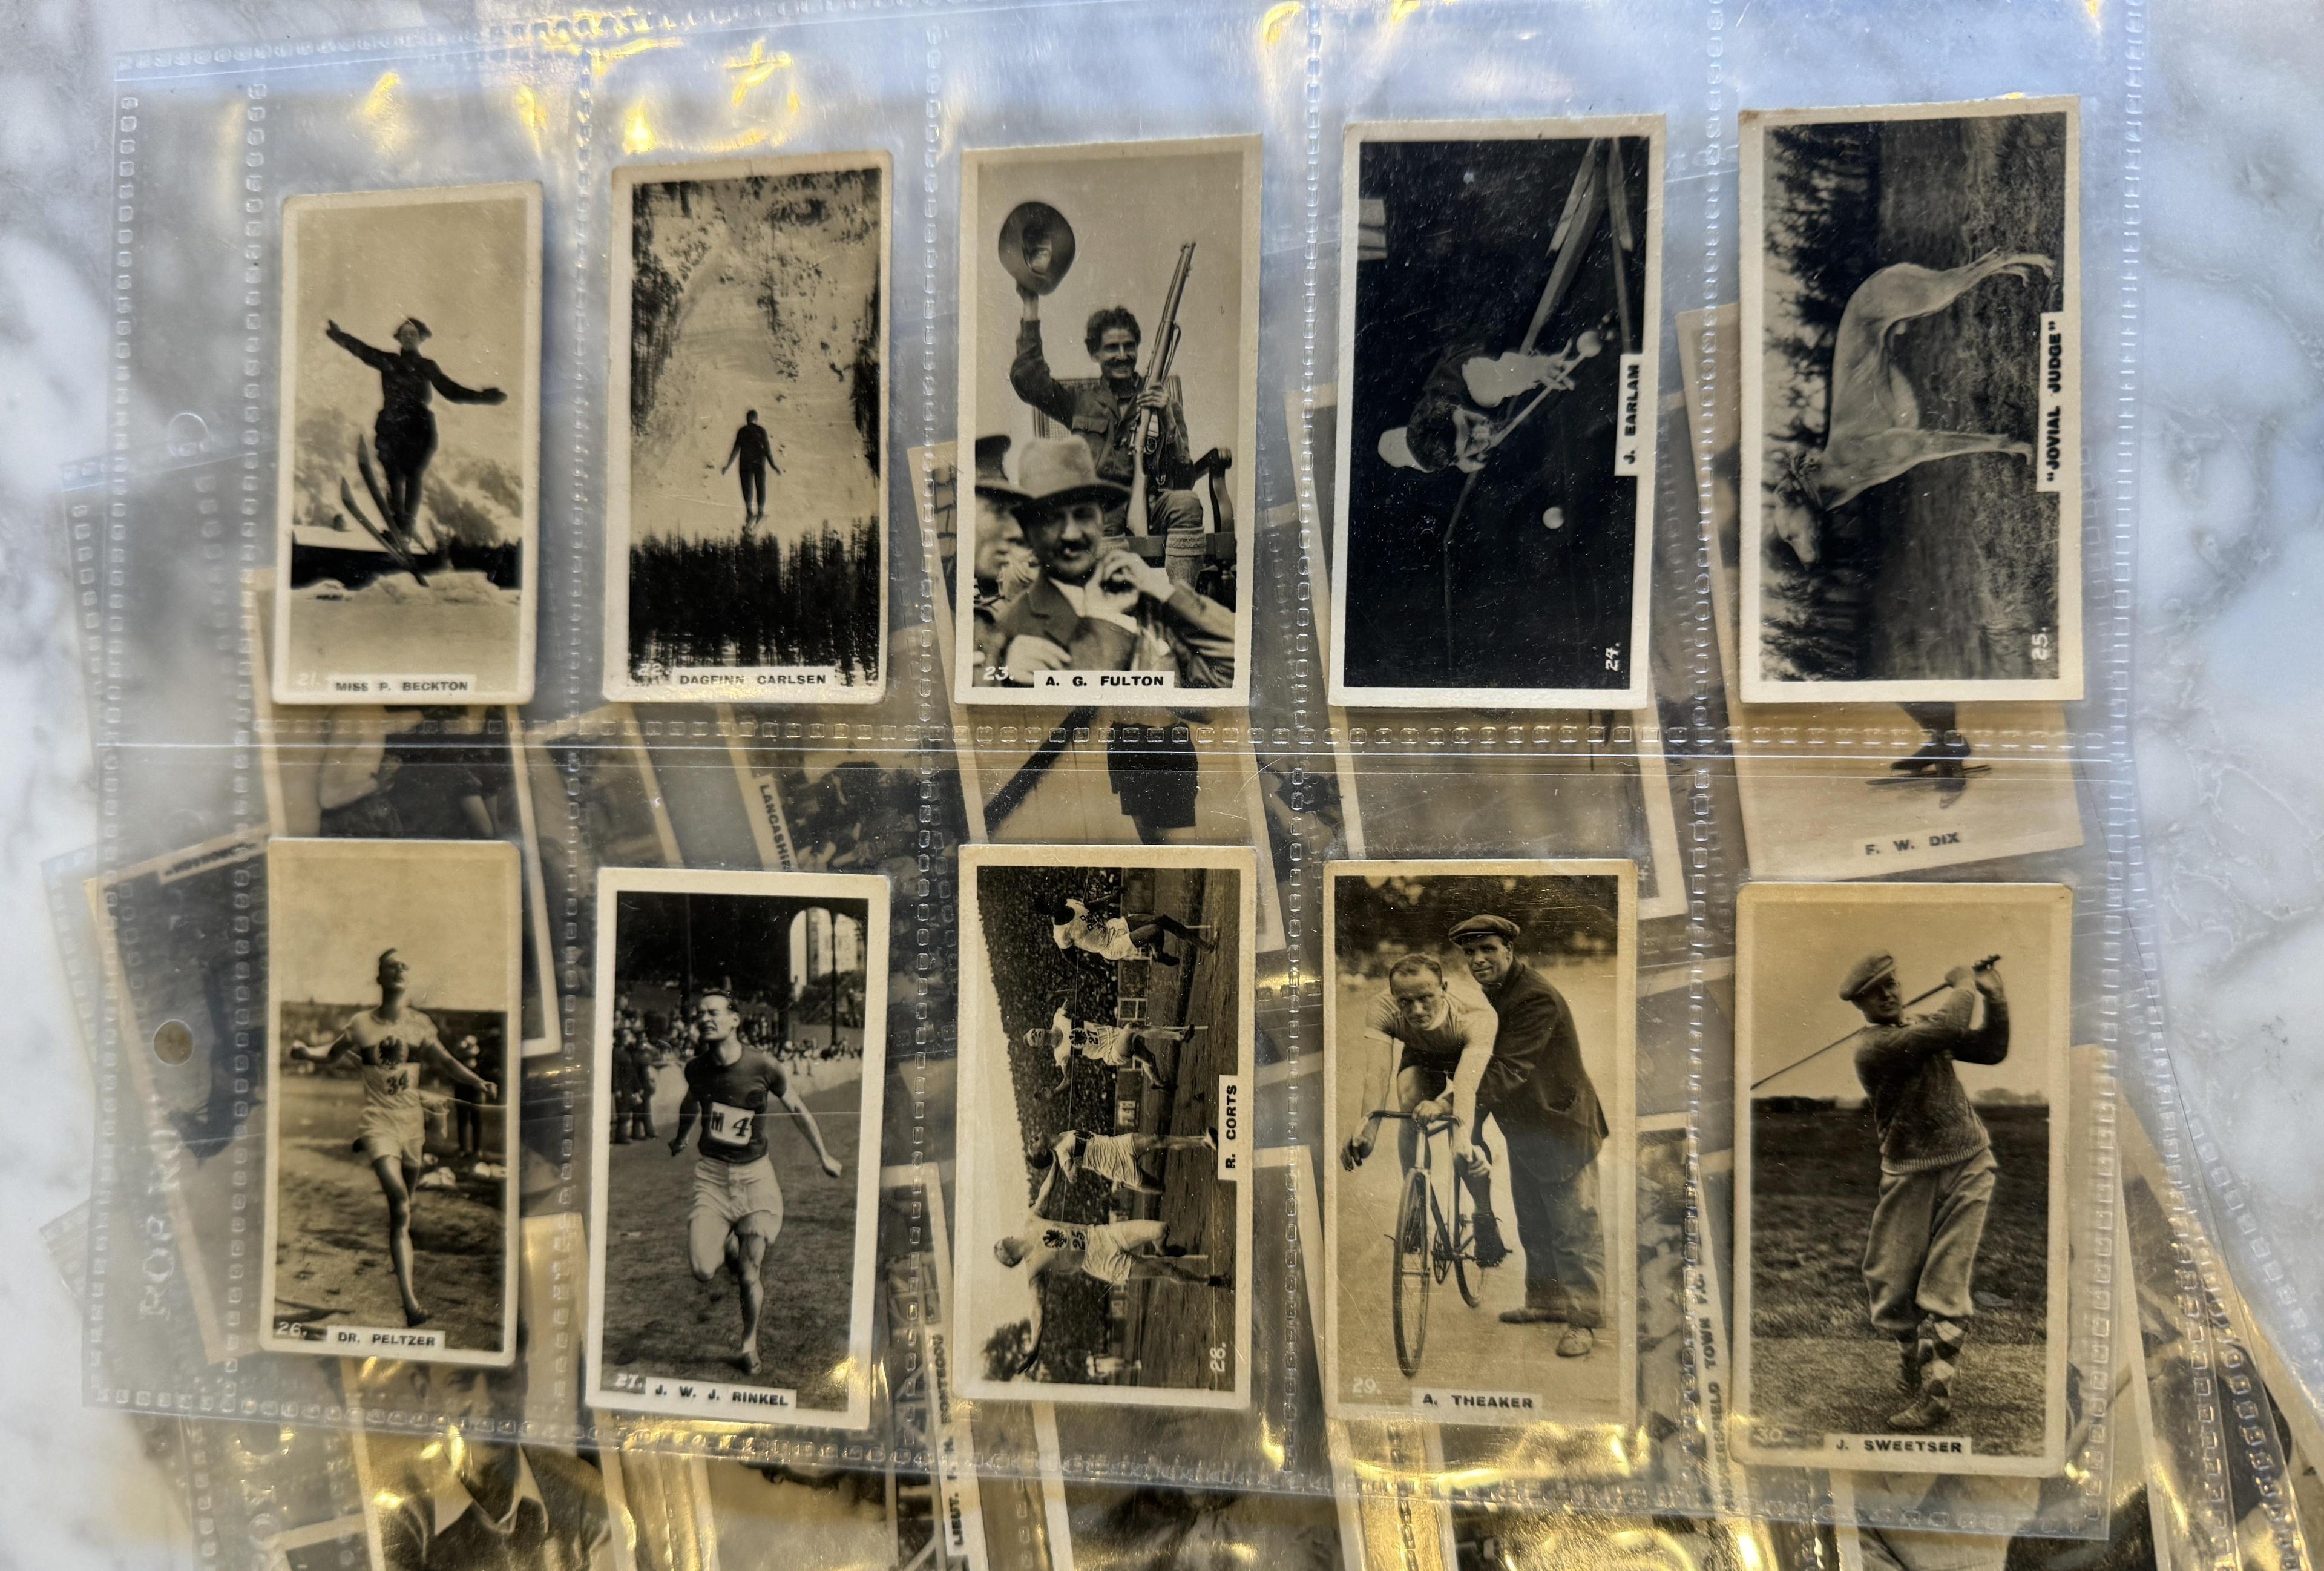 LOT OF WHO'S WHO IN SPORT 1926 CARD SERIES